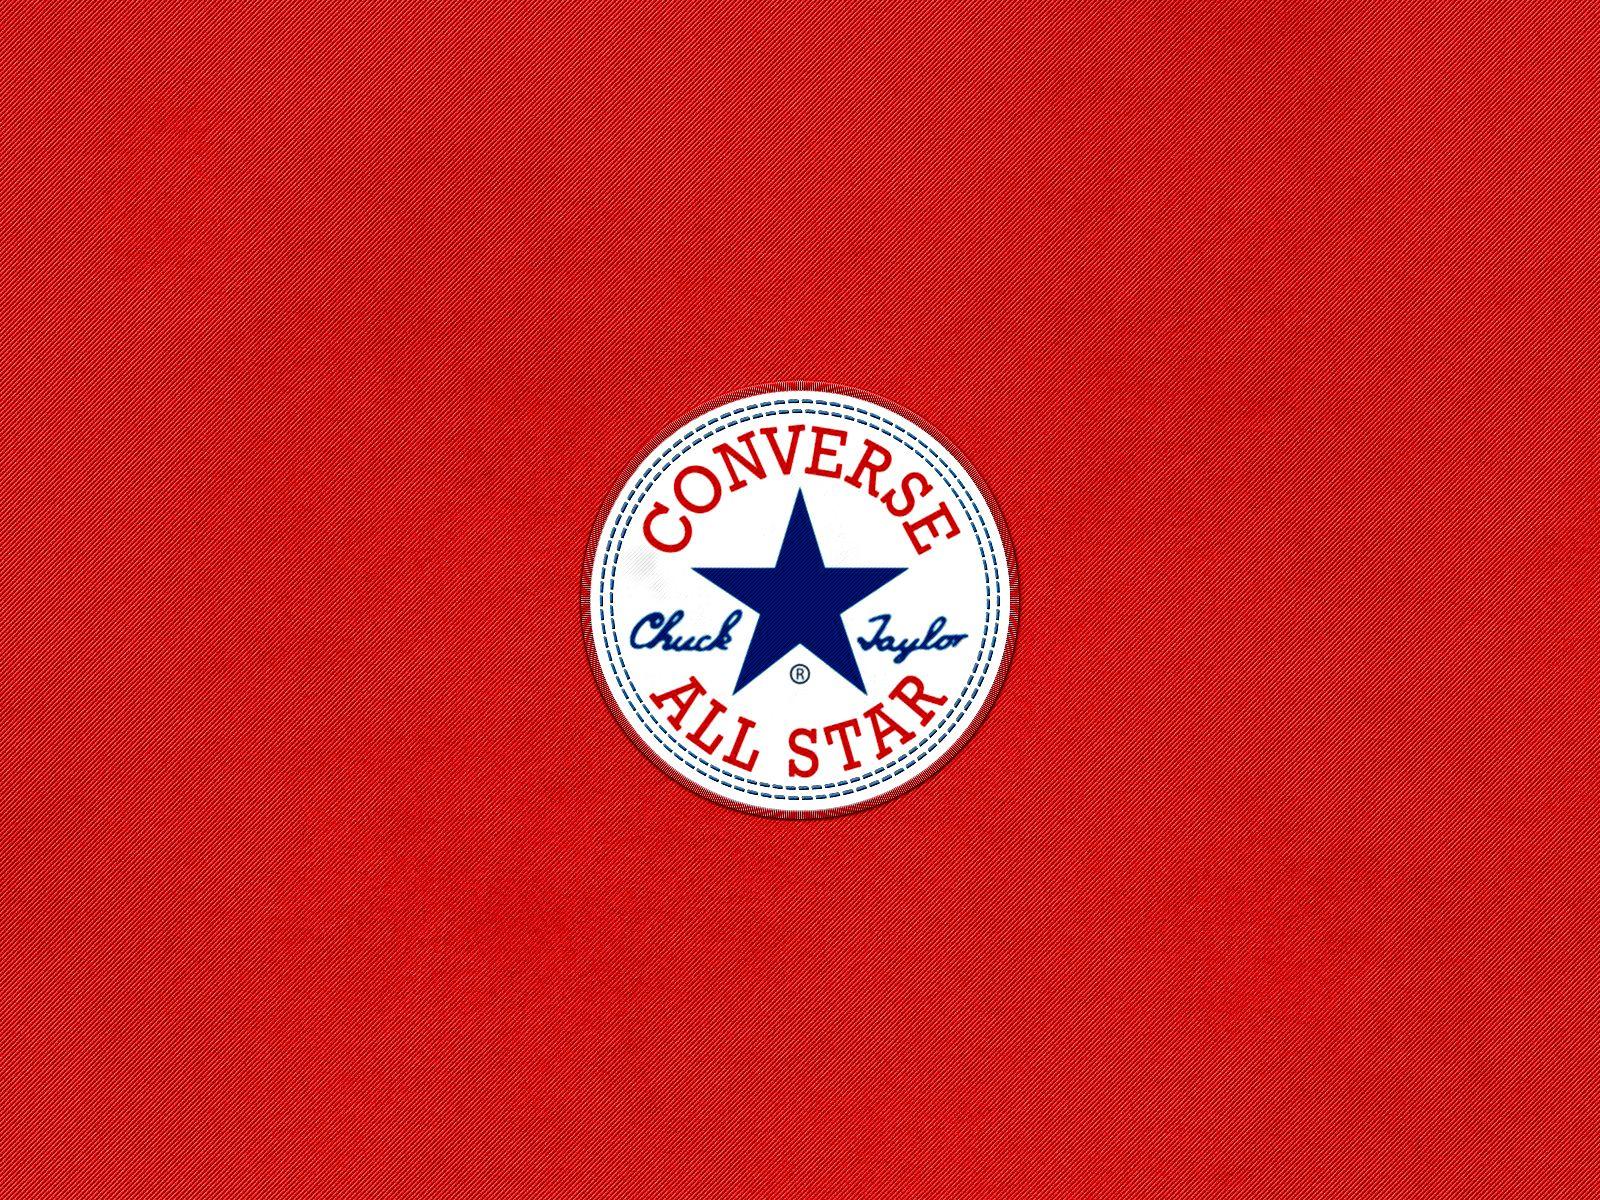 Converse All Star HD Logo Red Background Download Free Wallpaper